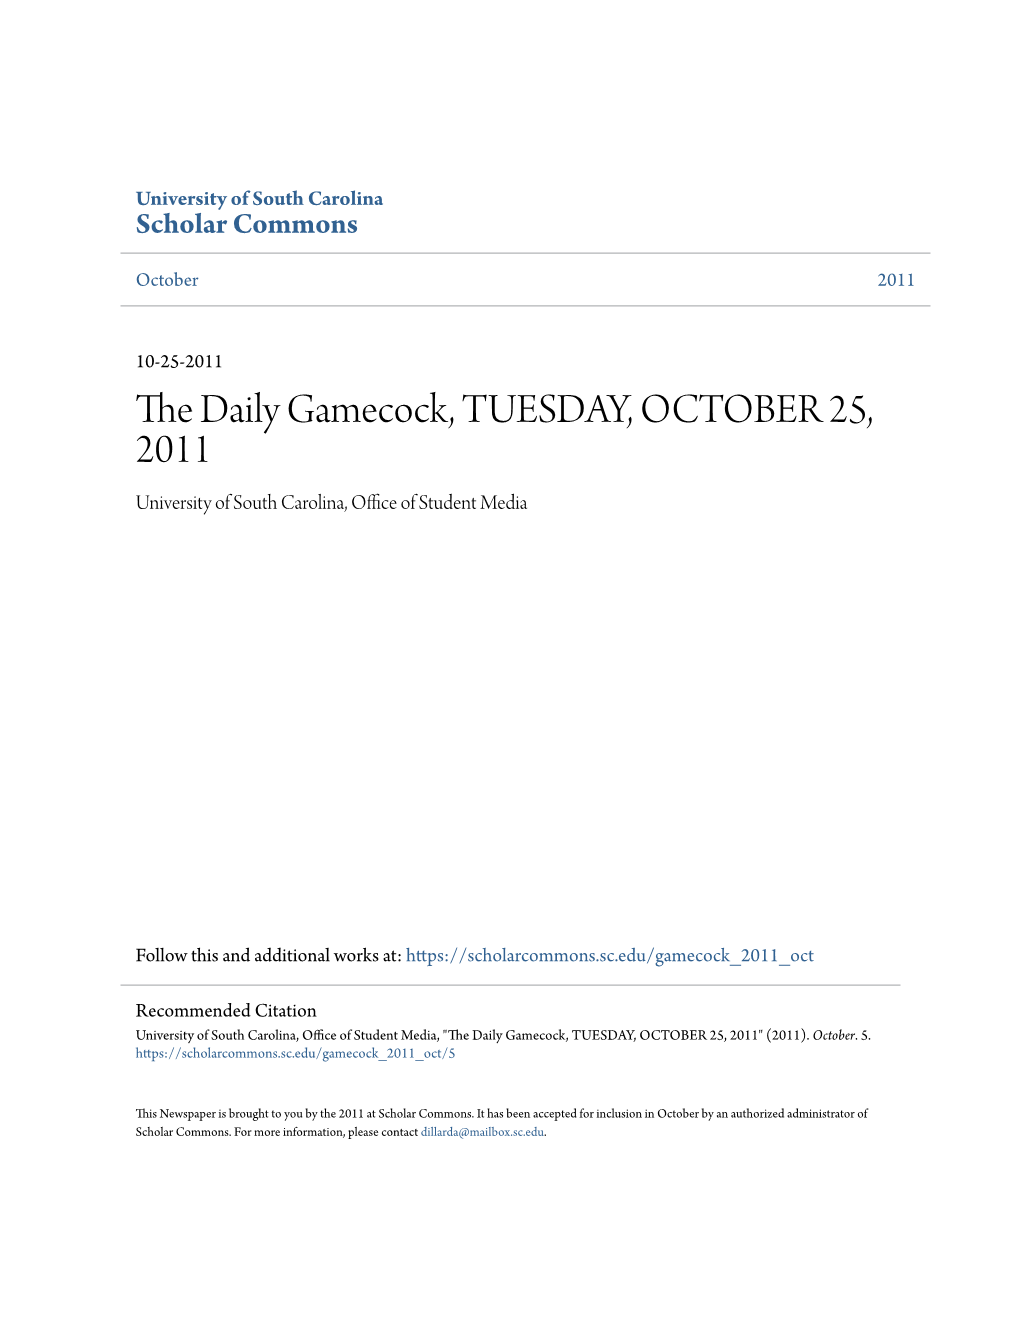 The Daily Gamecock, TUESDAY, OCTOBER 25, 2011